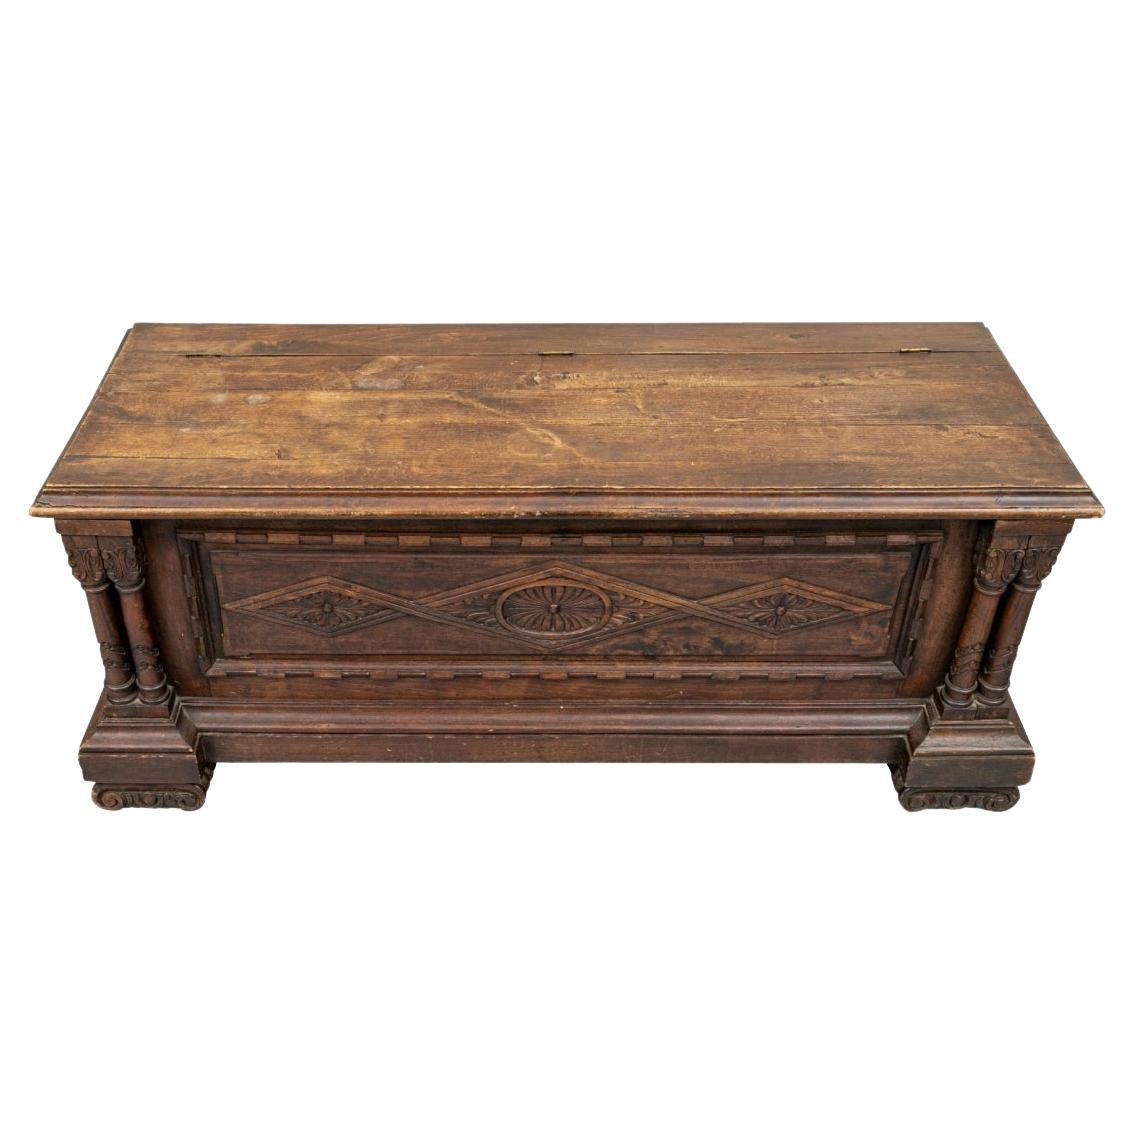 Antique Rustic Carved Wood Chest as Cocktail Table